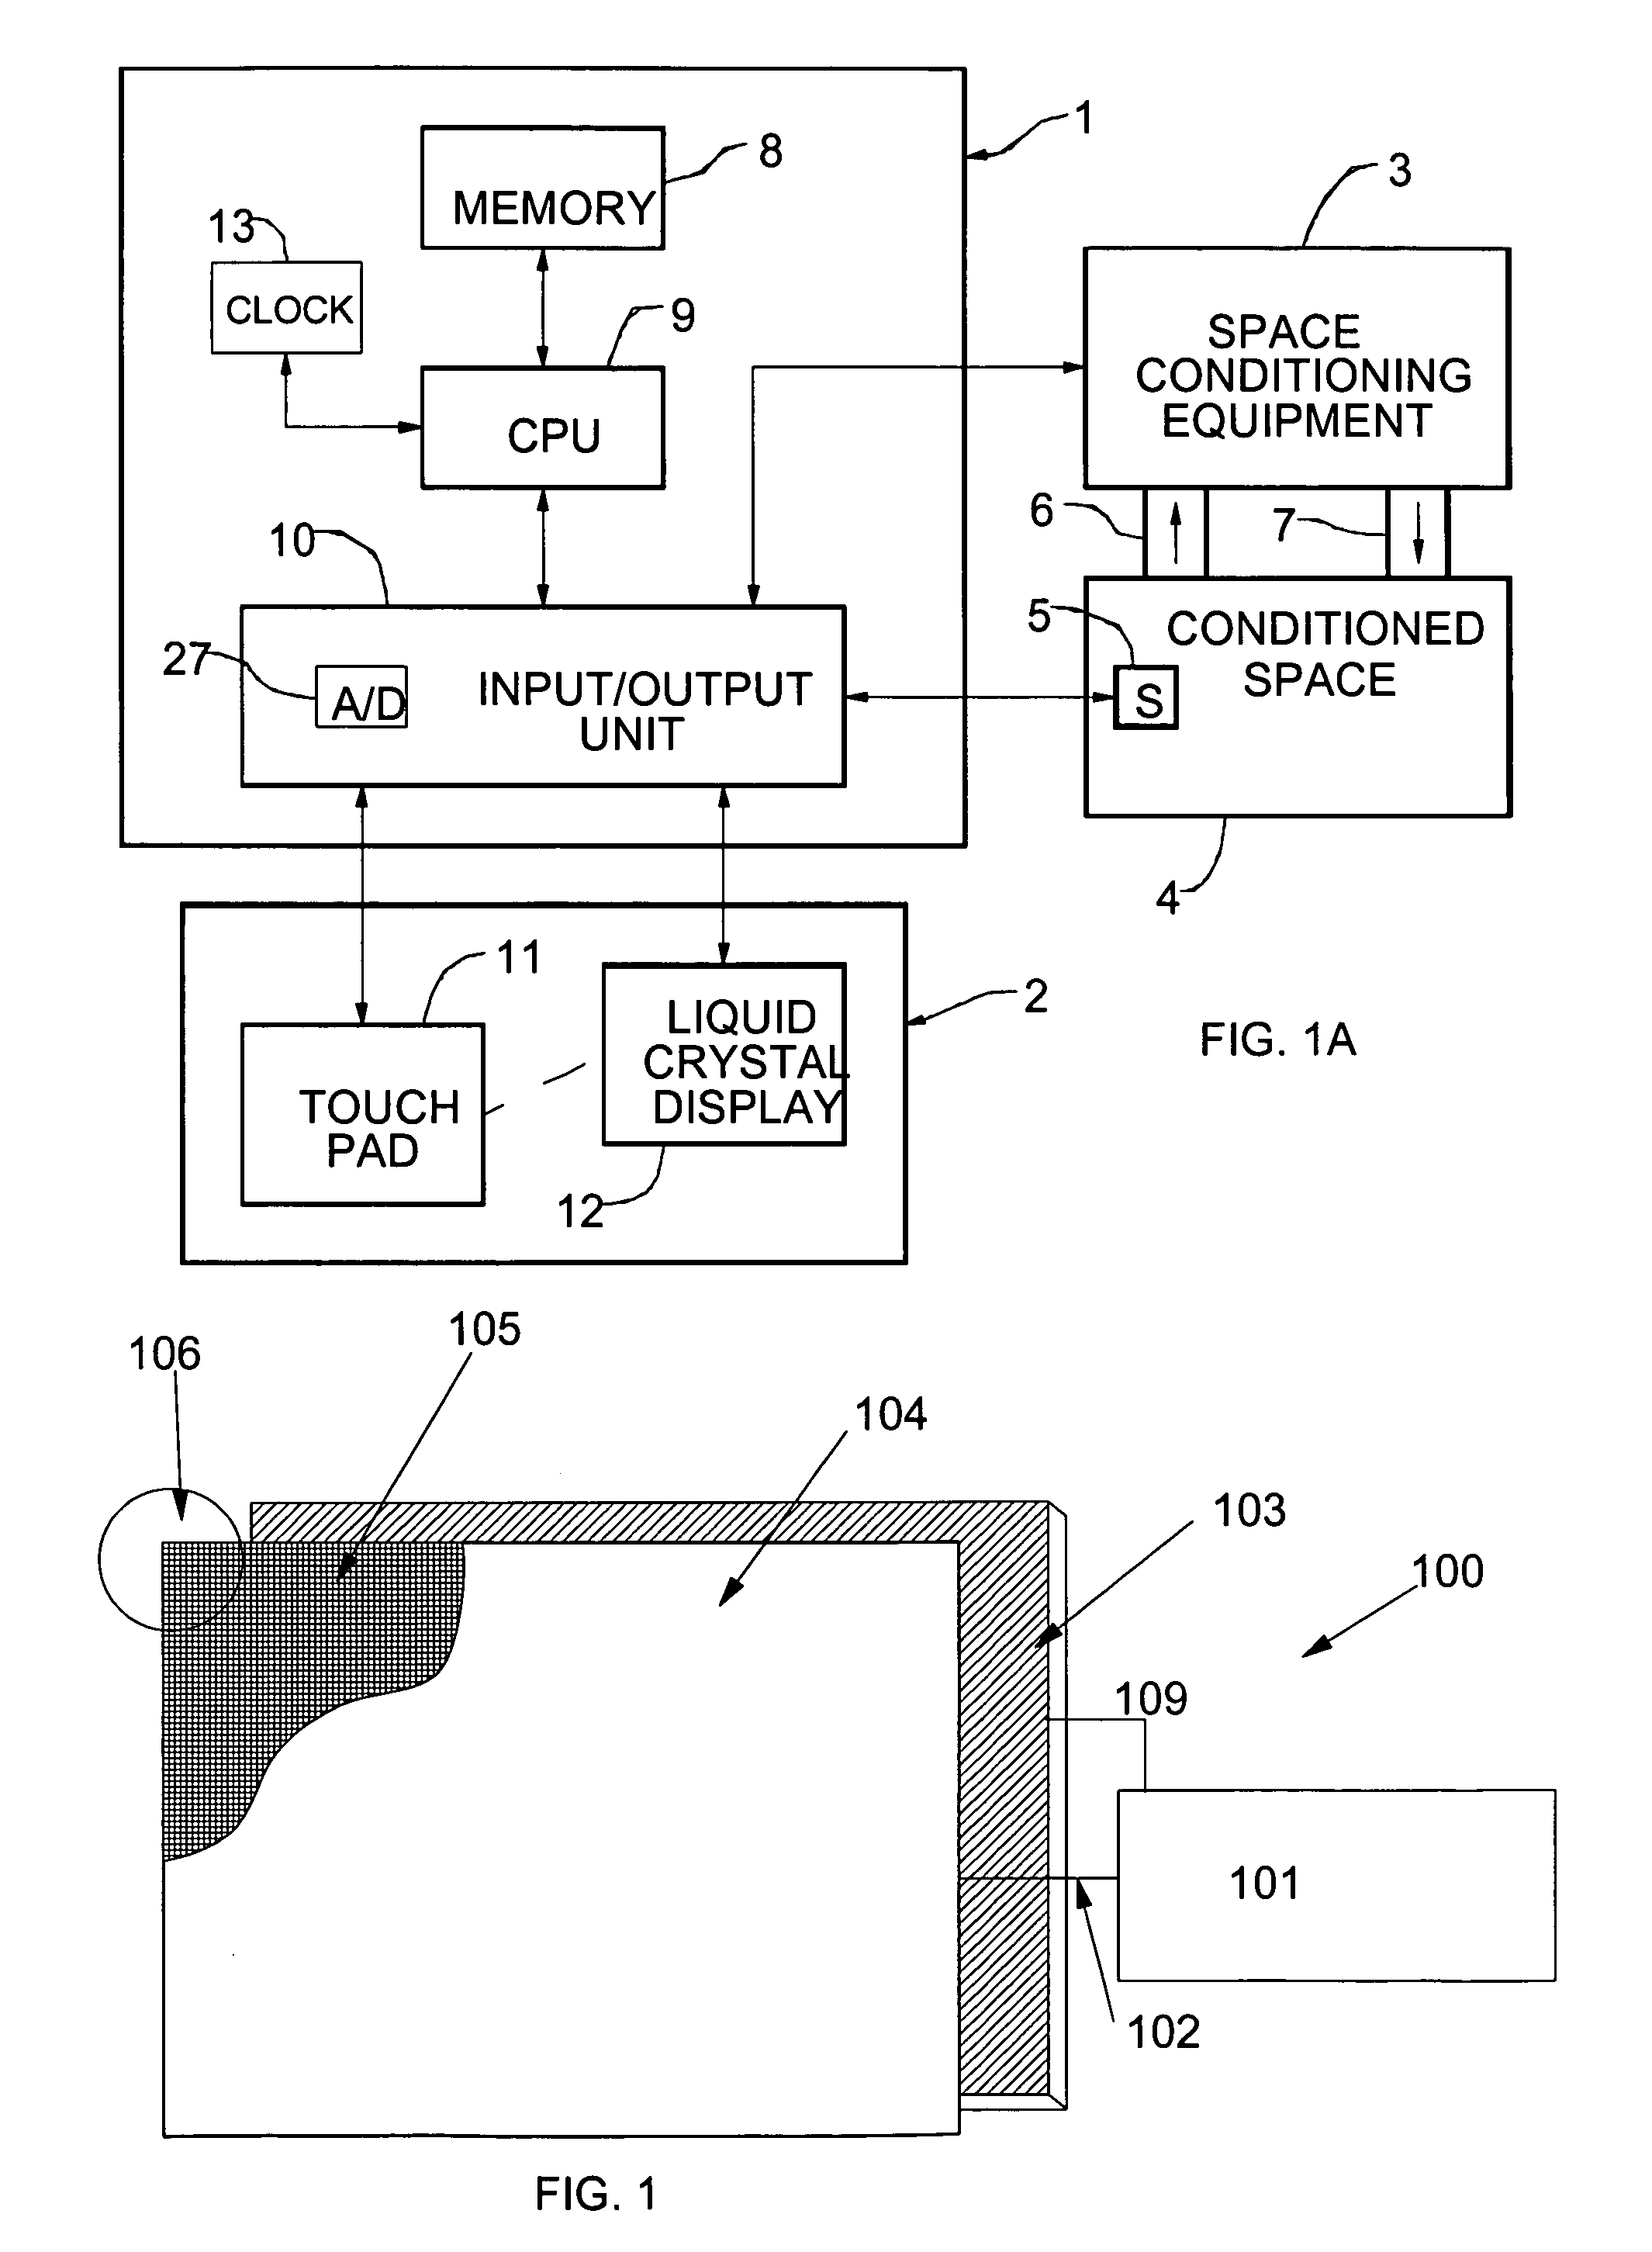 Programmable thermostat incorporating a display screen selectively presenting system modes that includes a simple mode